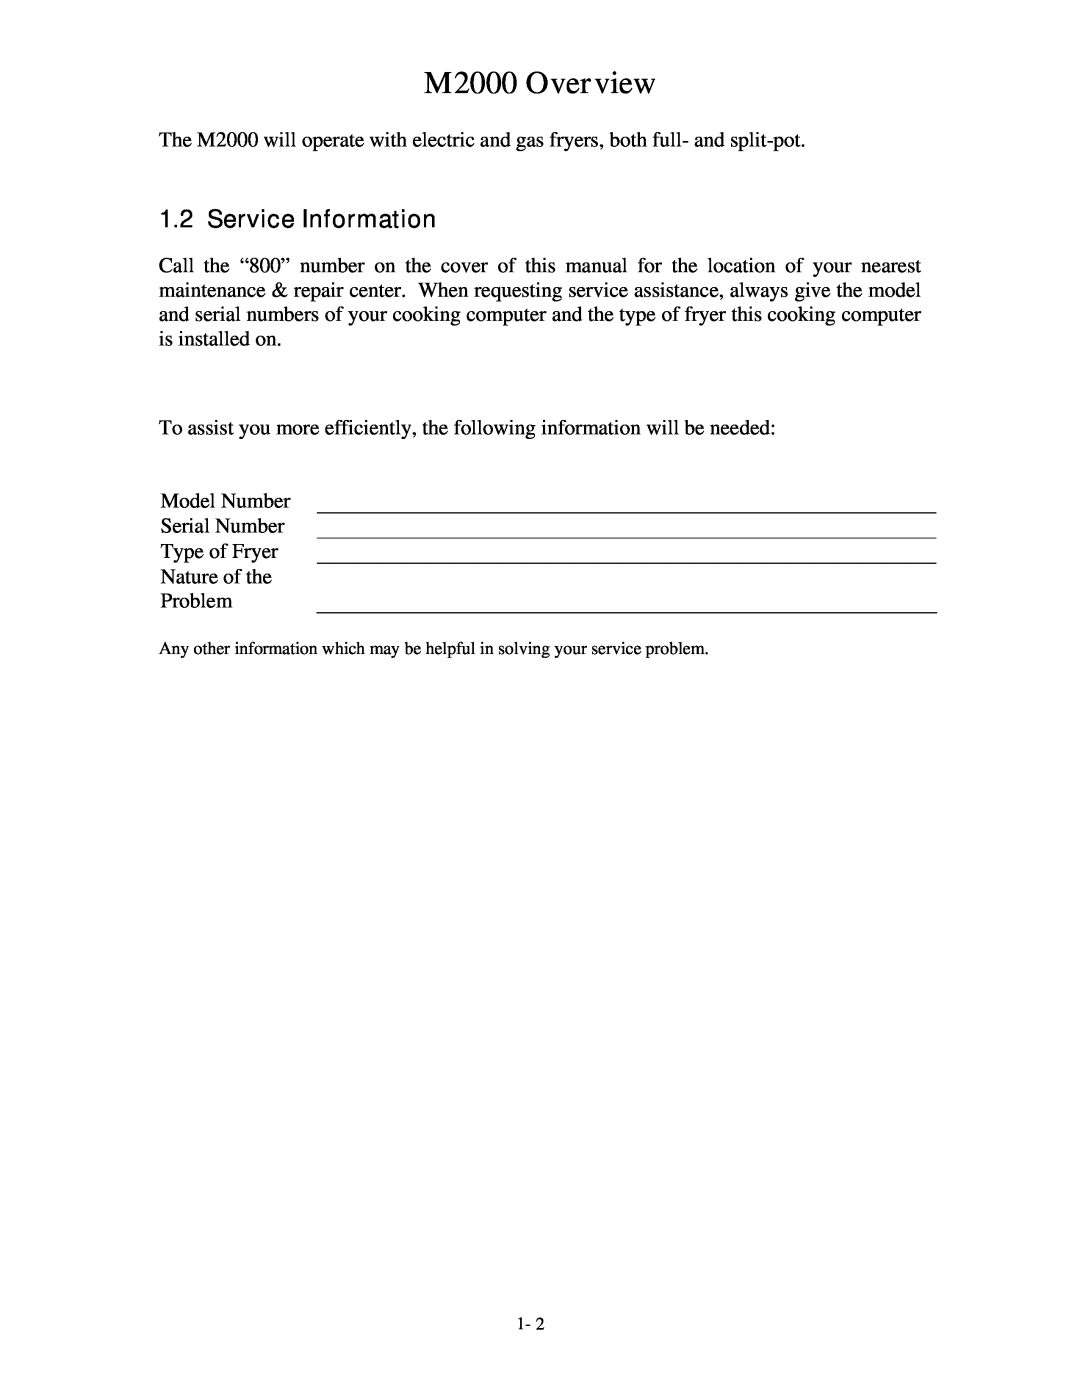 Frymaster operation manual Service Information, M2000 Overview 